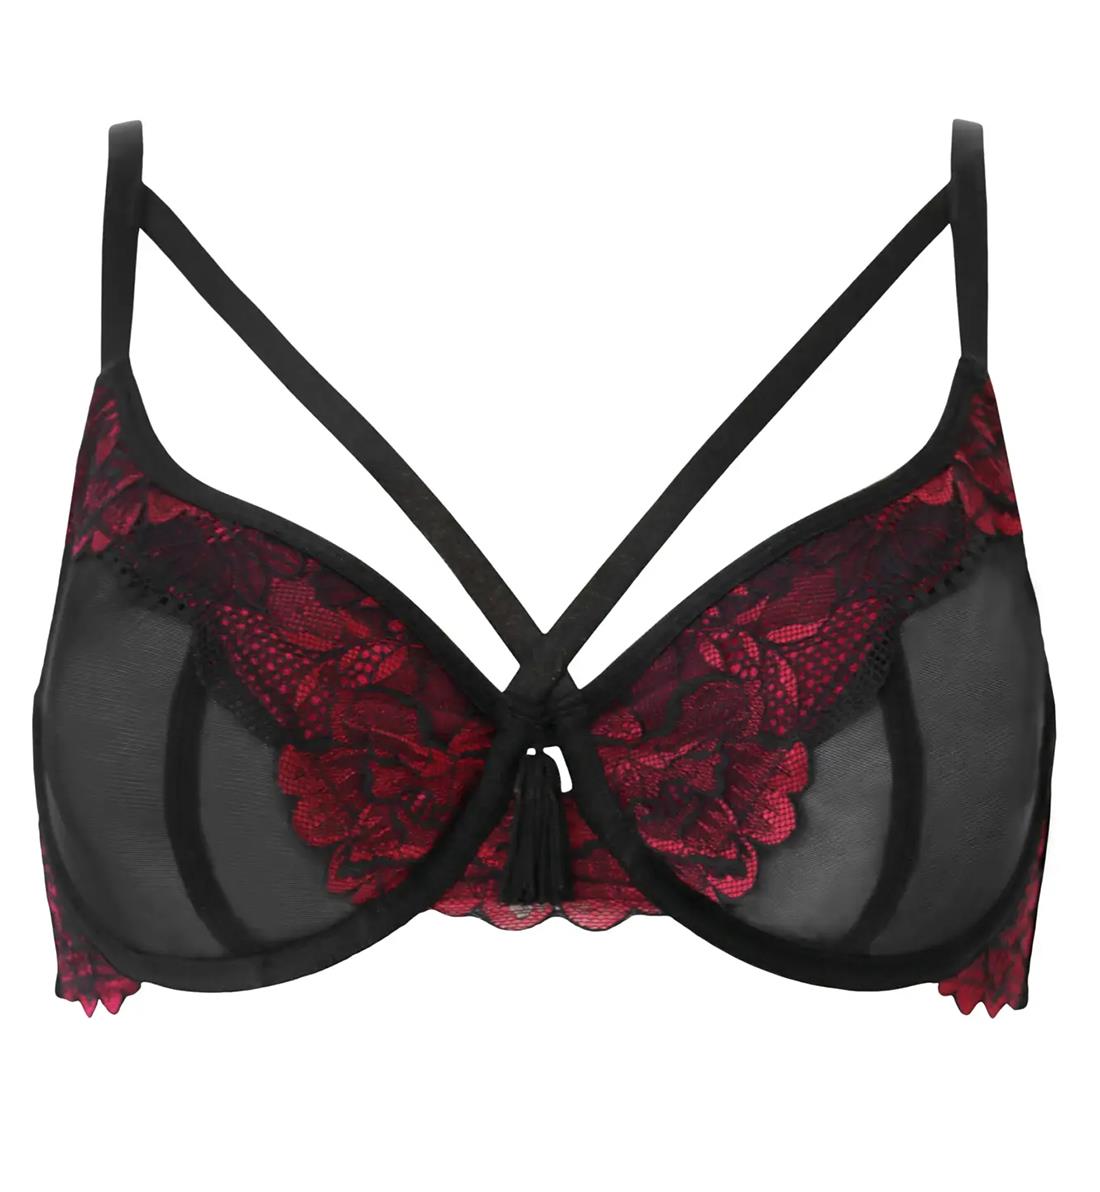 Pour Moi After Hours Strappy Underwire Bra (27502),32F,Red/Black - Red/Black,32F